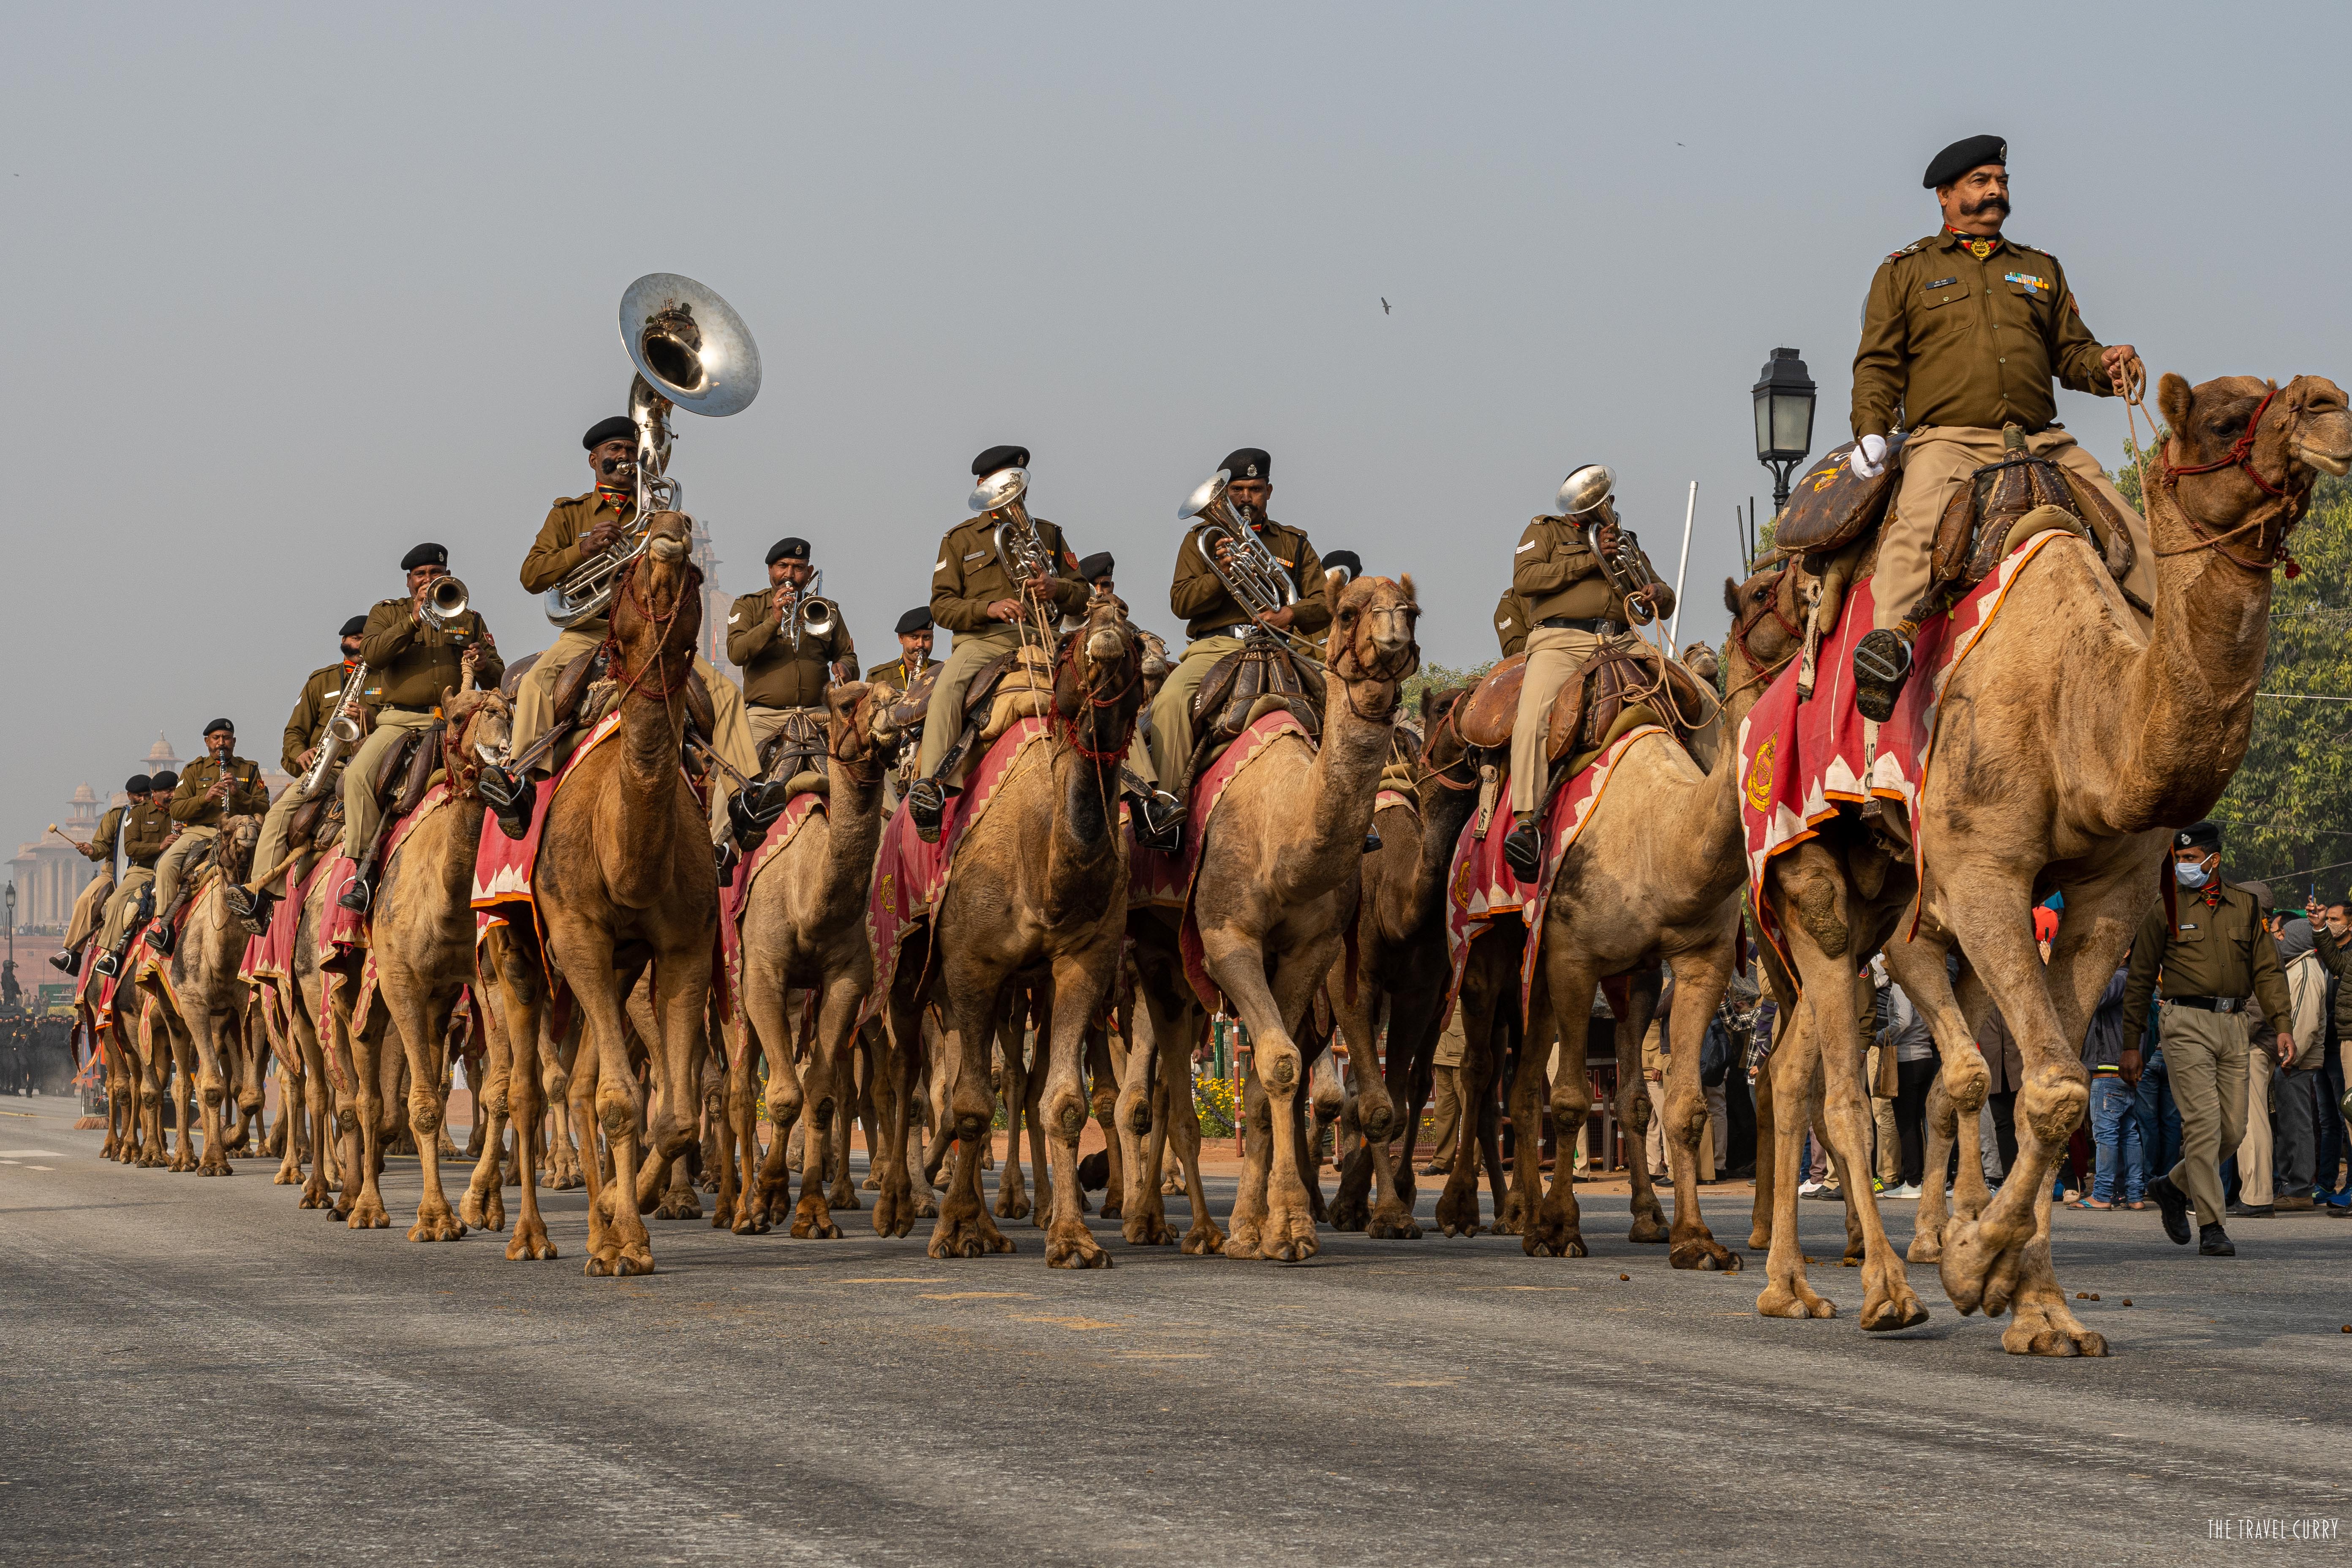 BSF Band on Camels